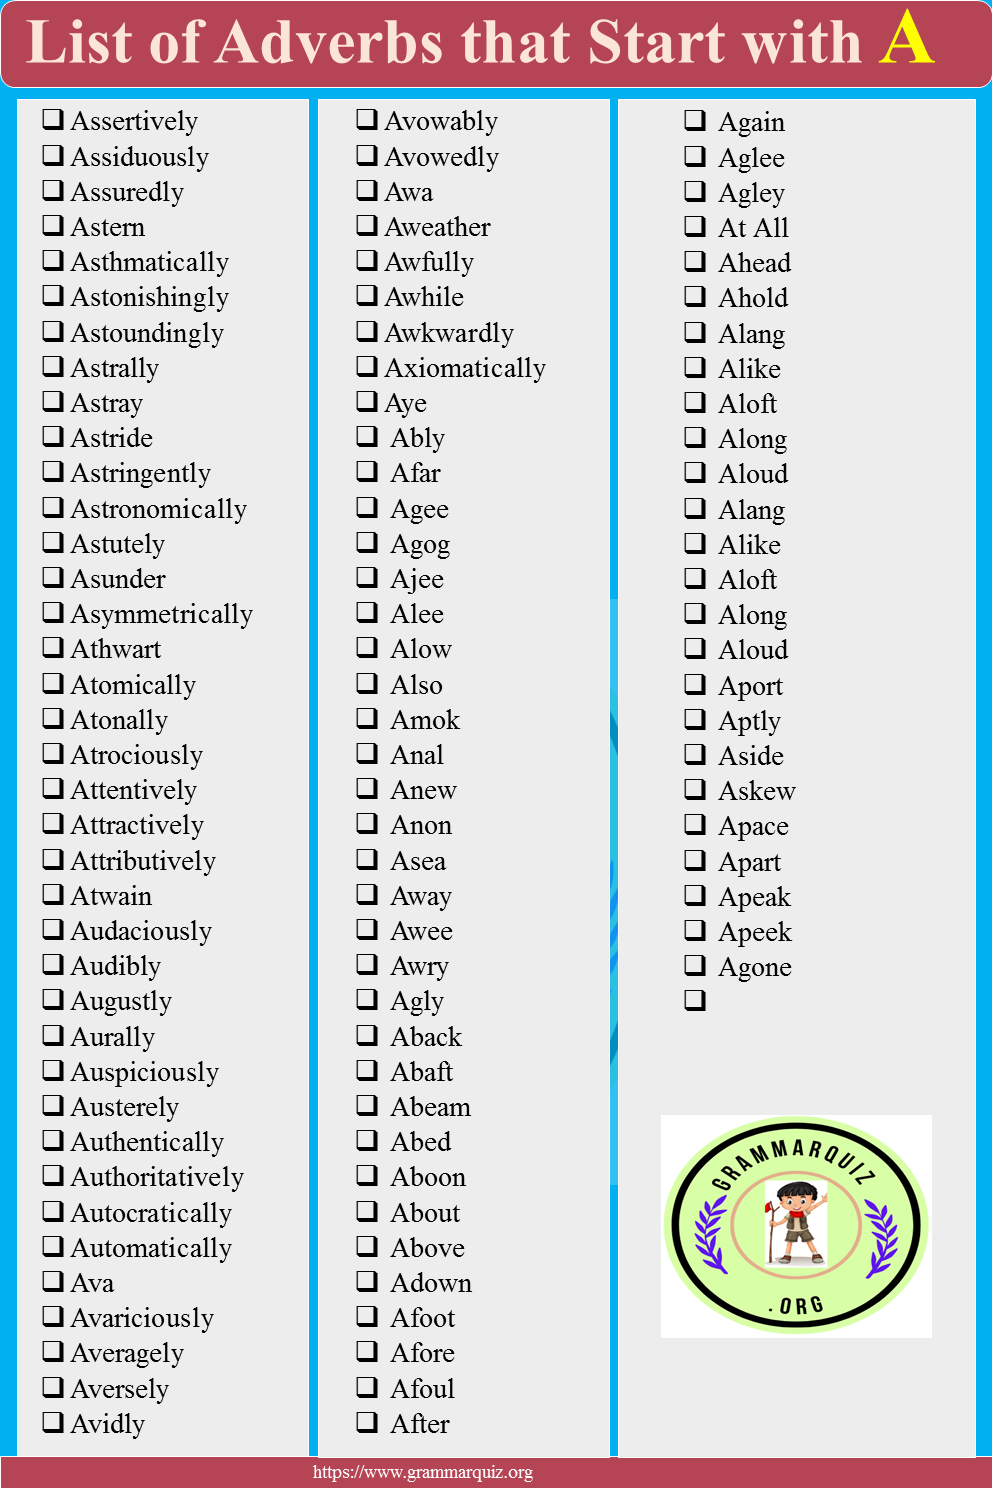 4 and 5 Letter Adverbs that Start with A